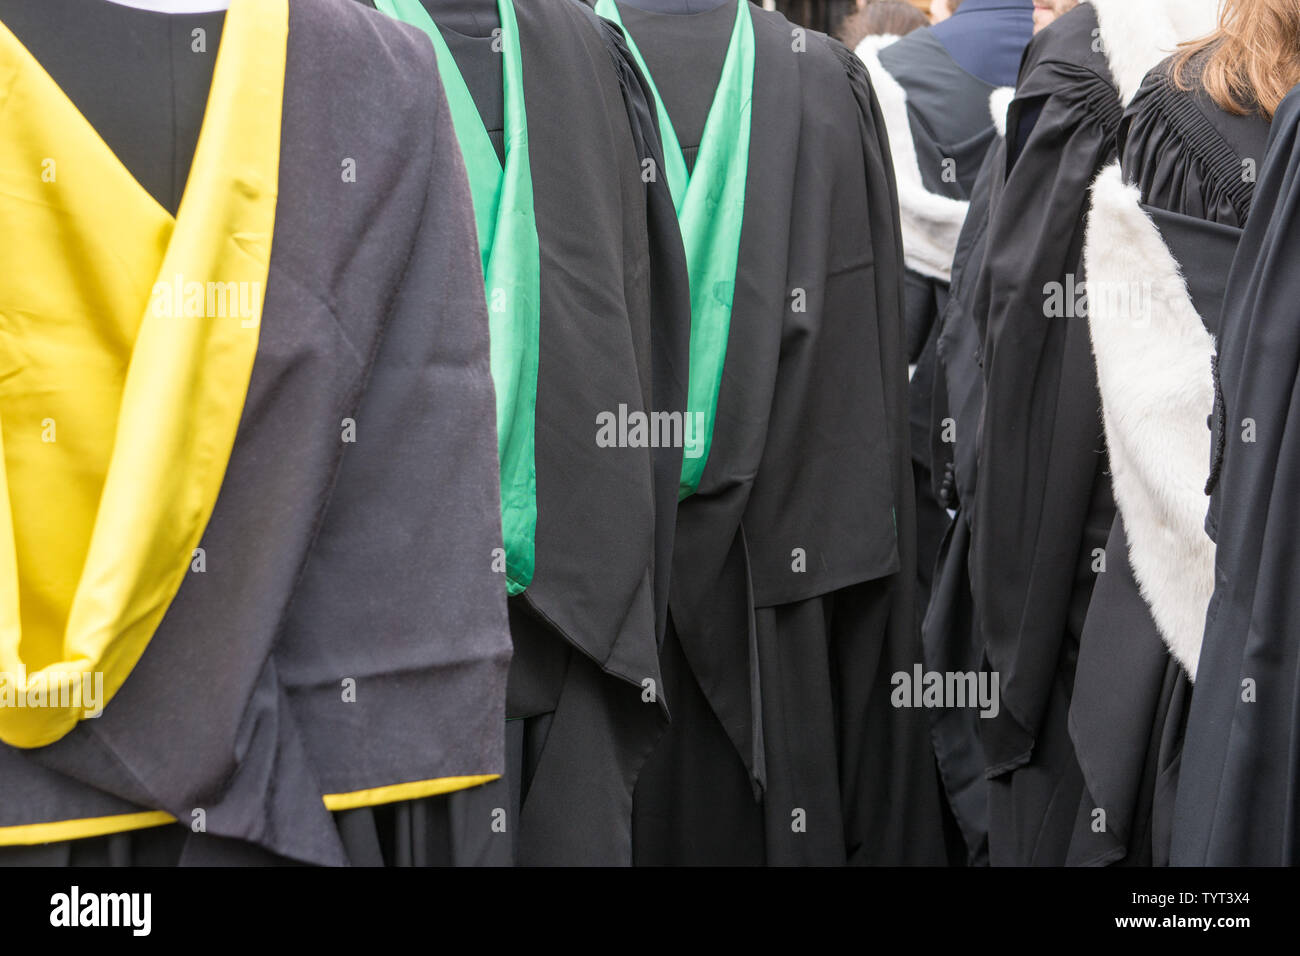 Aggregate more than 144 academic graduation gowns